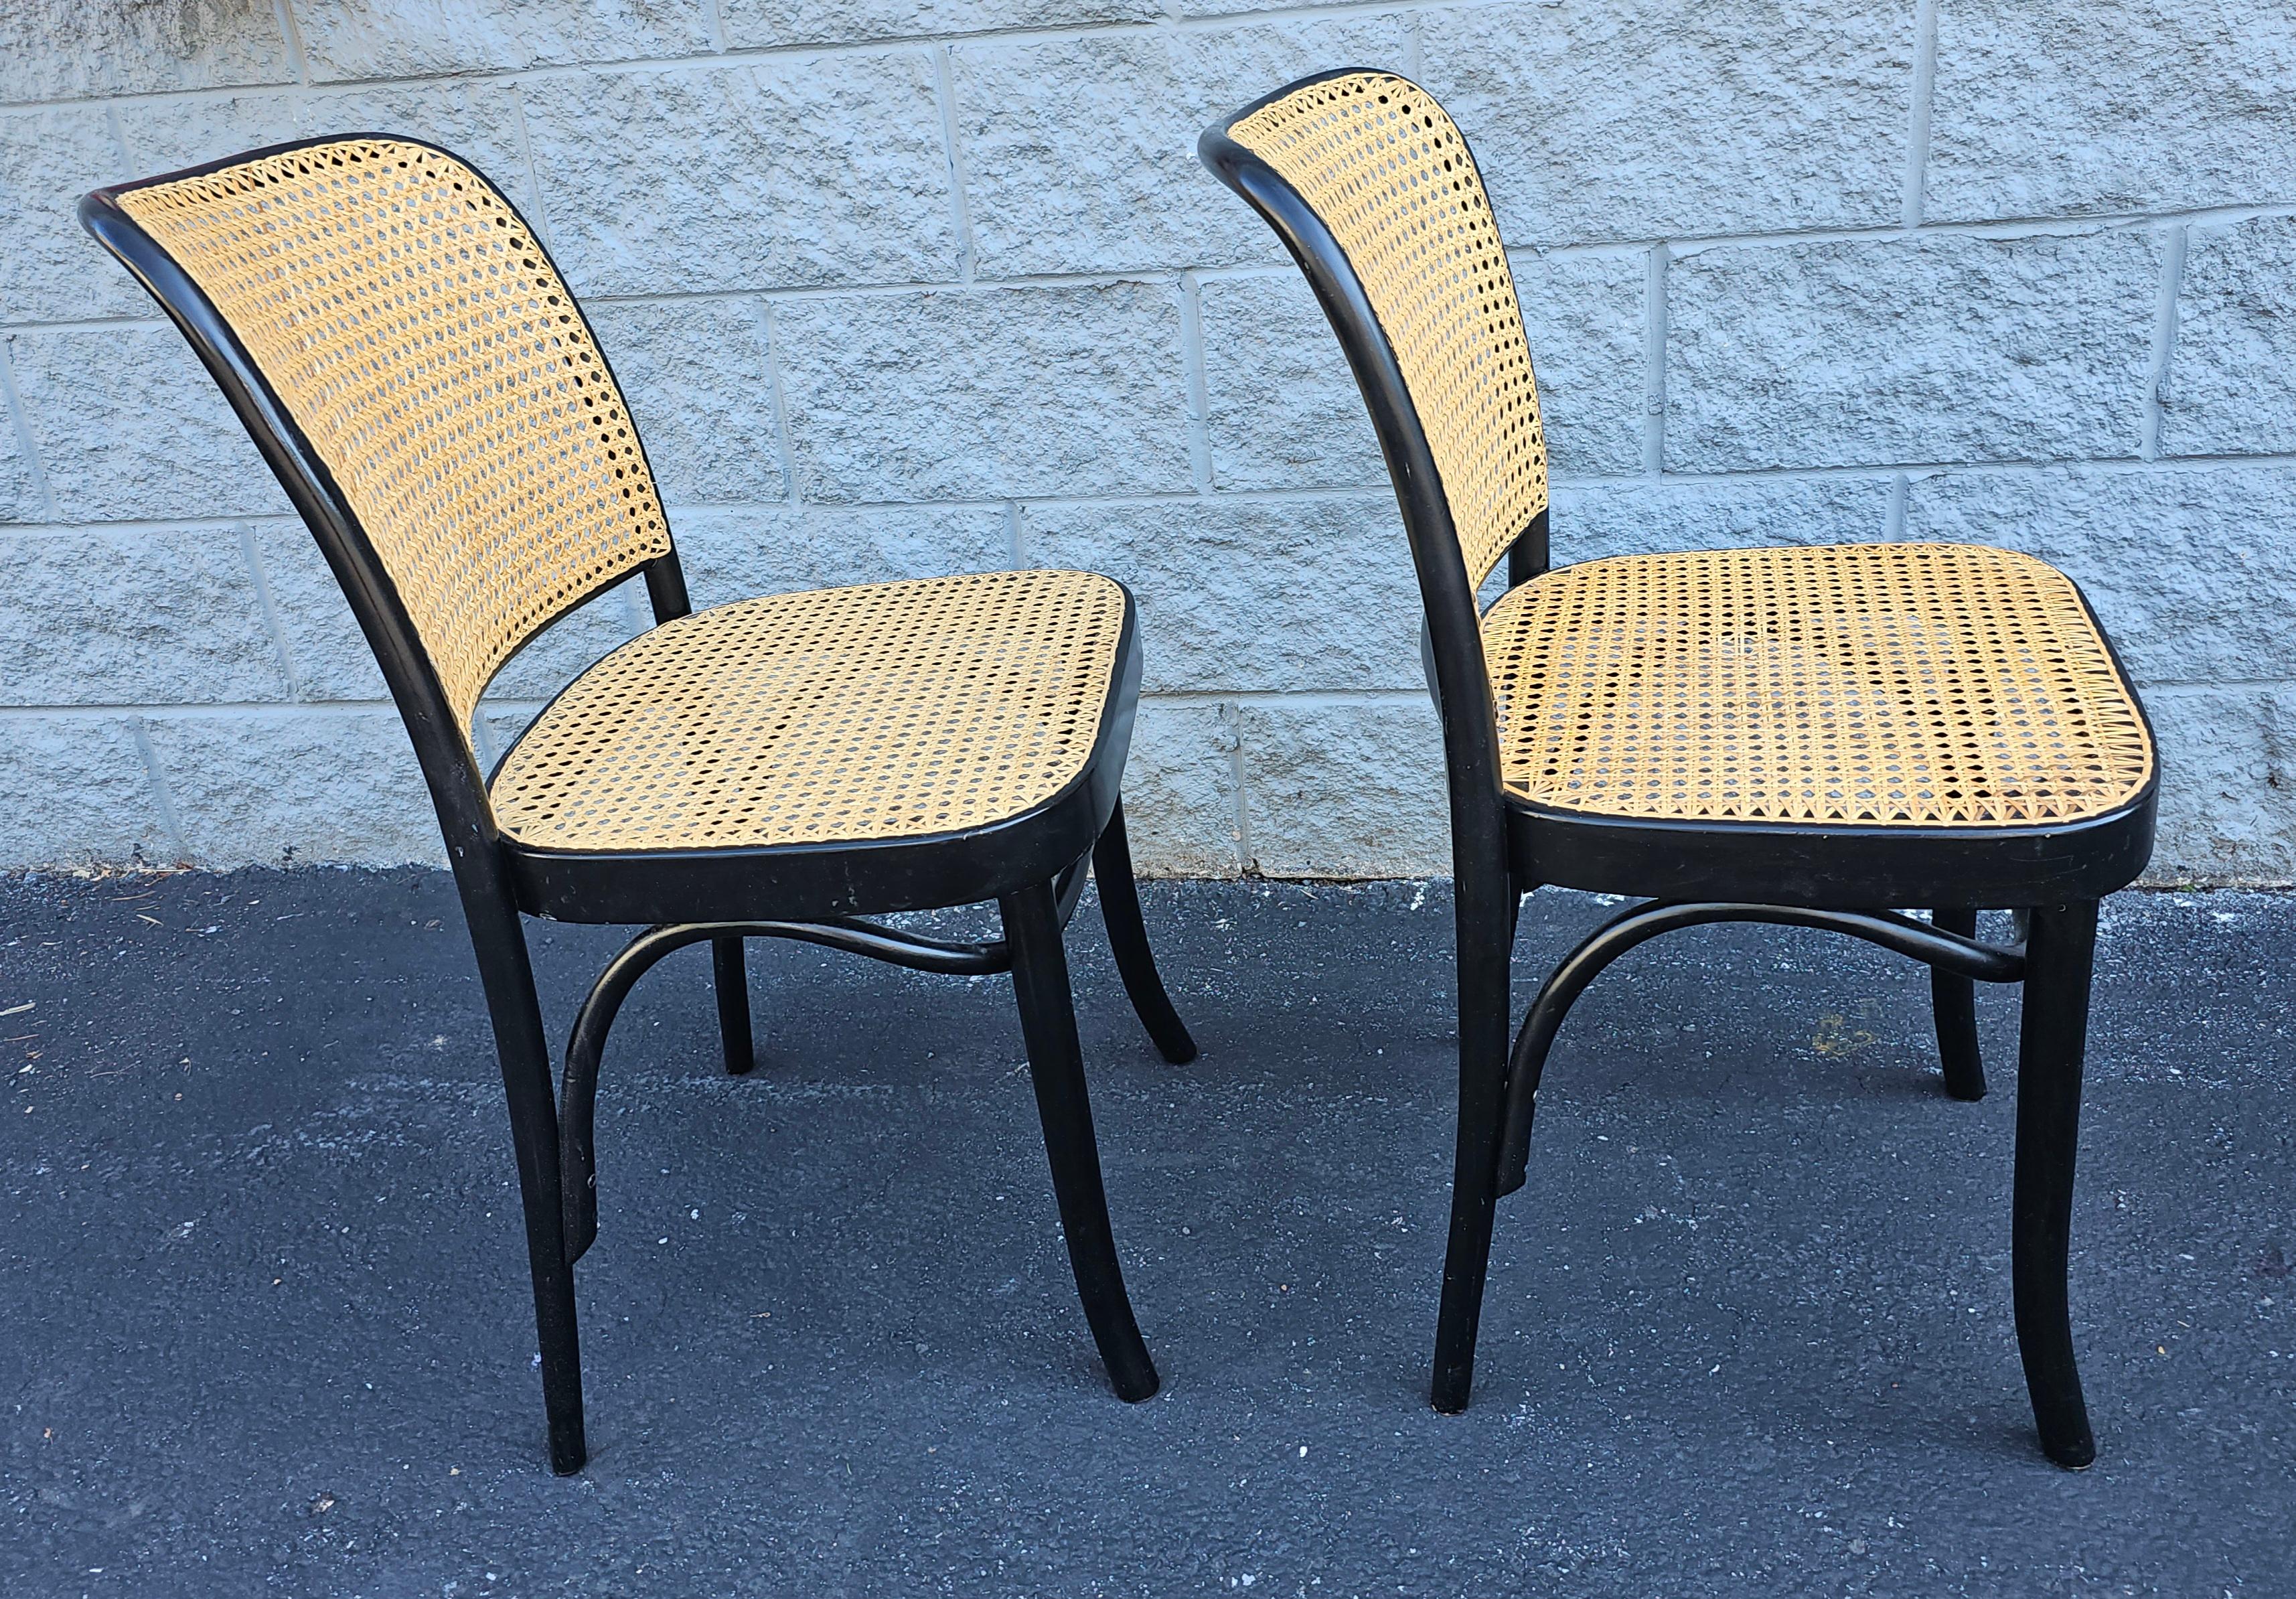  Mid-20th Century Josef Hoffmann For FMG Poland ebonized bentwood  and Cane chair.
Newer caning. Priced per item.